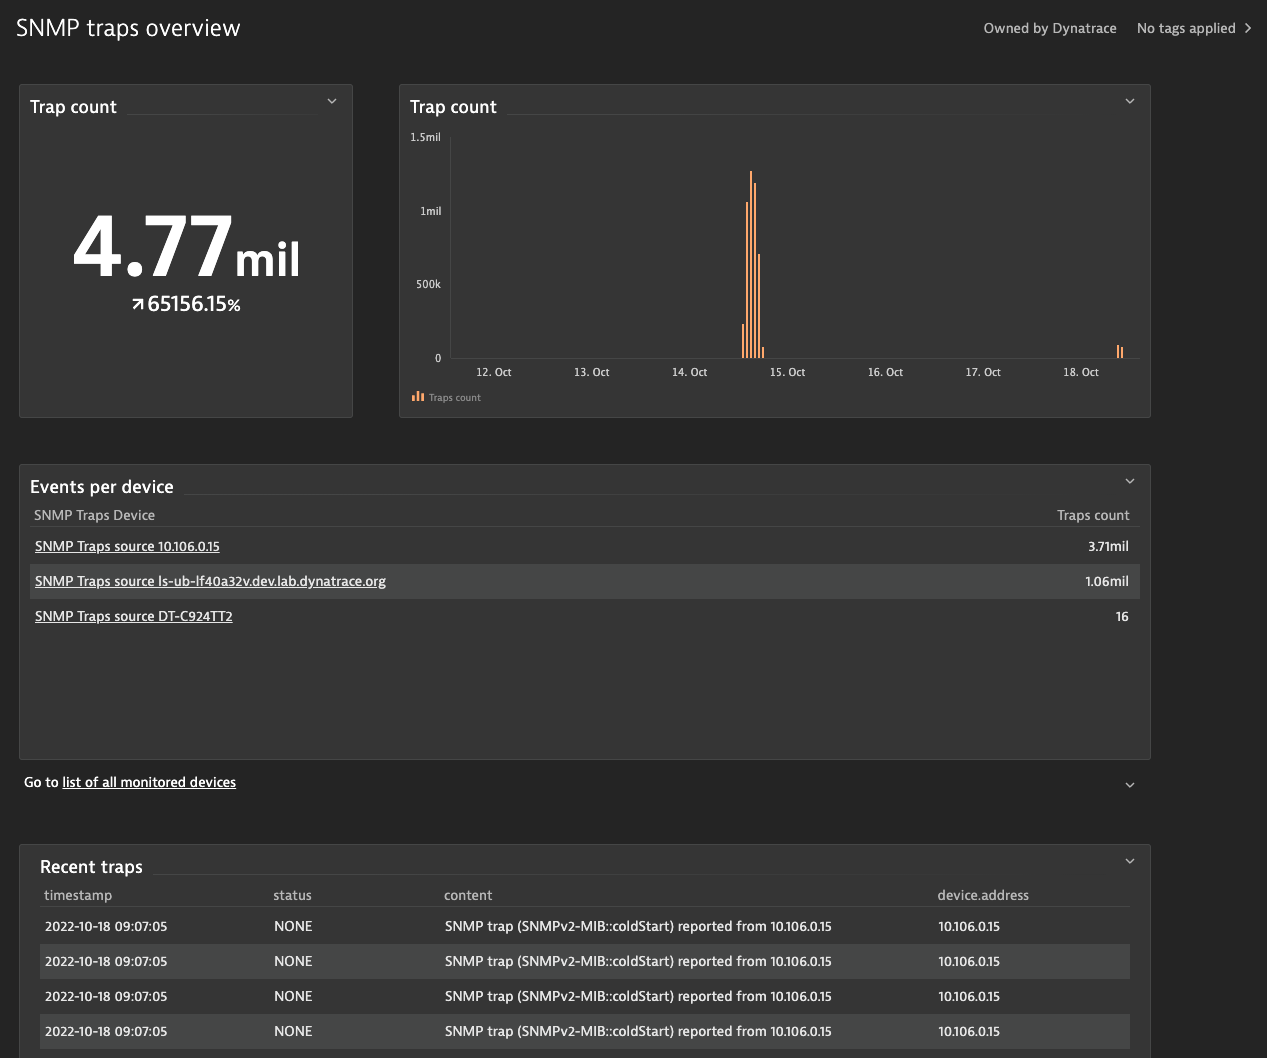 SNMP traps overview dashboard